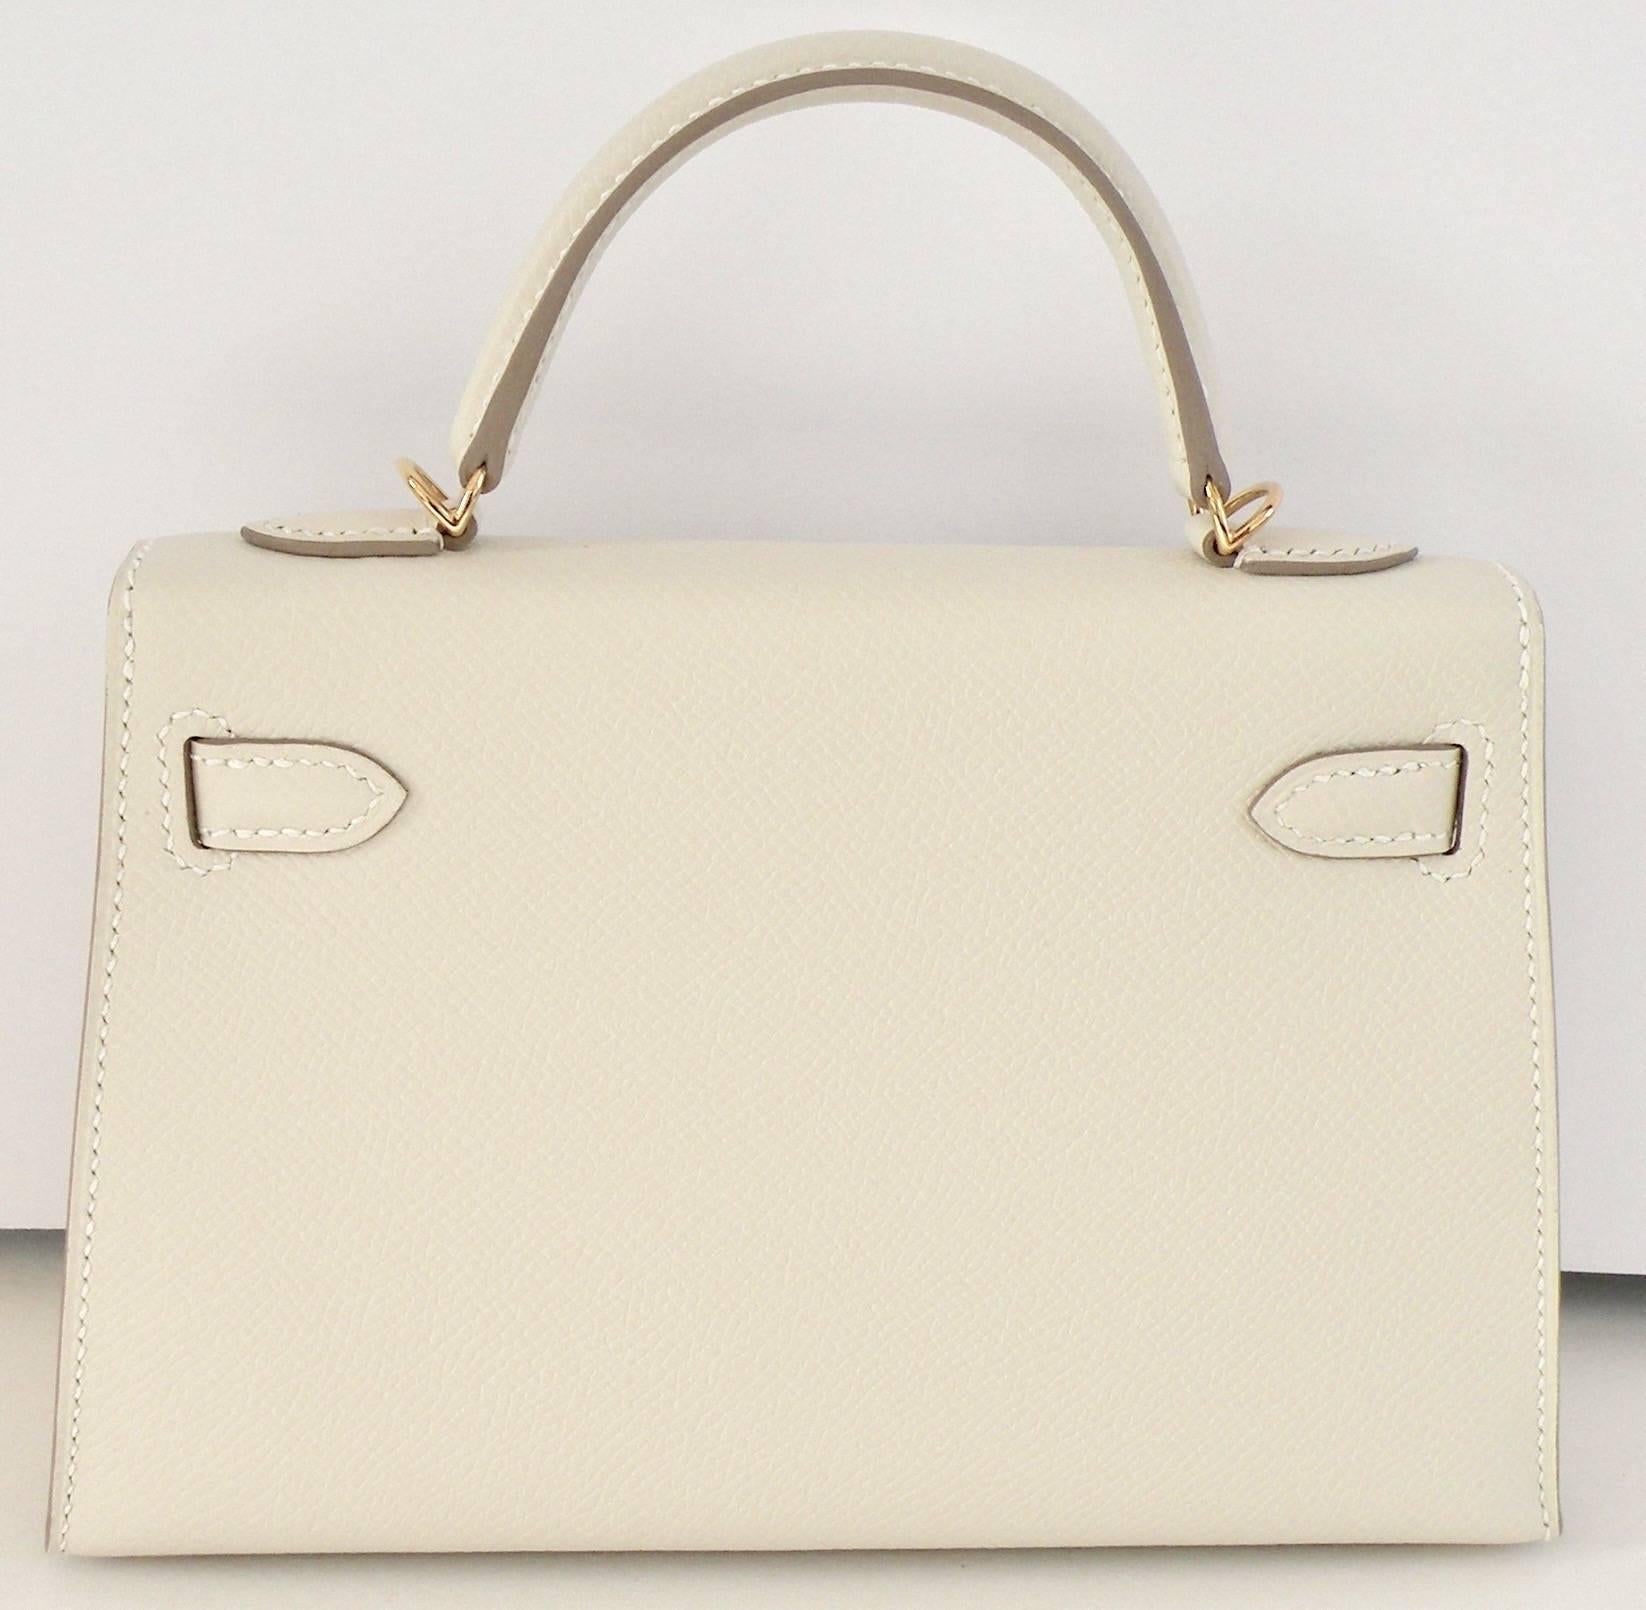 Hermes Mini Kelly Bag 
Size: 20cm
Color: Craie
Leather: Epsom
Hardware: Gold

Hermes Kelly Bag done in 20cm, a new size and shape just introduced from Hermes.  It quickly sold out to their VIP clients!
Very Rare, especially in Craie Epsom with